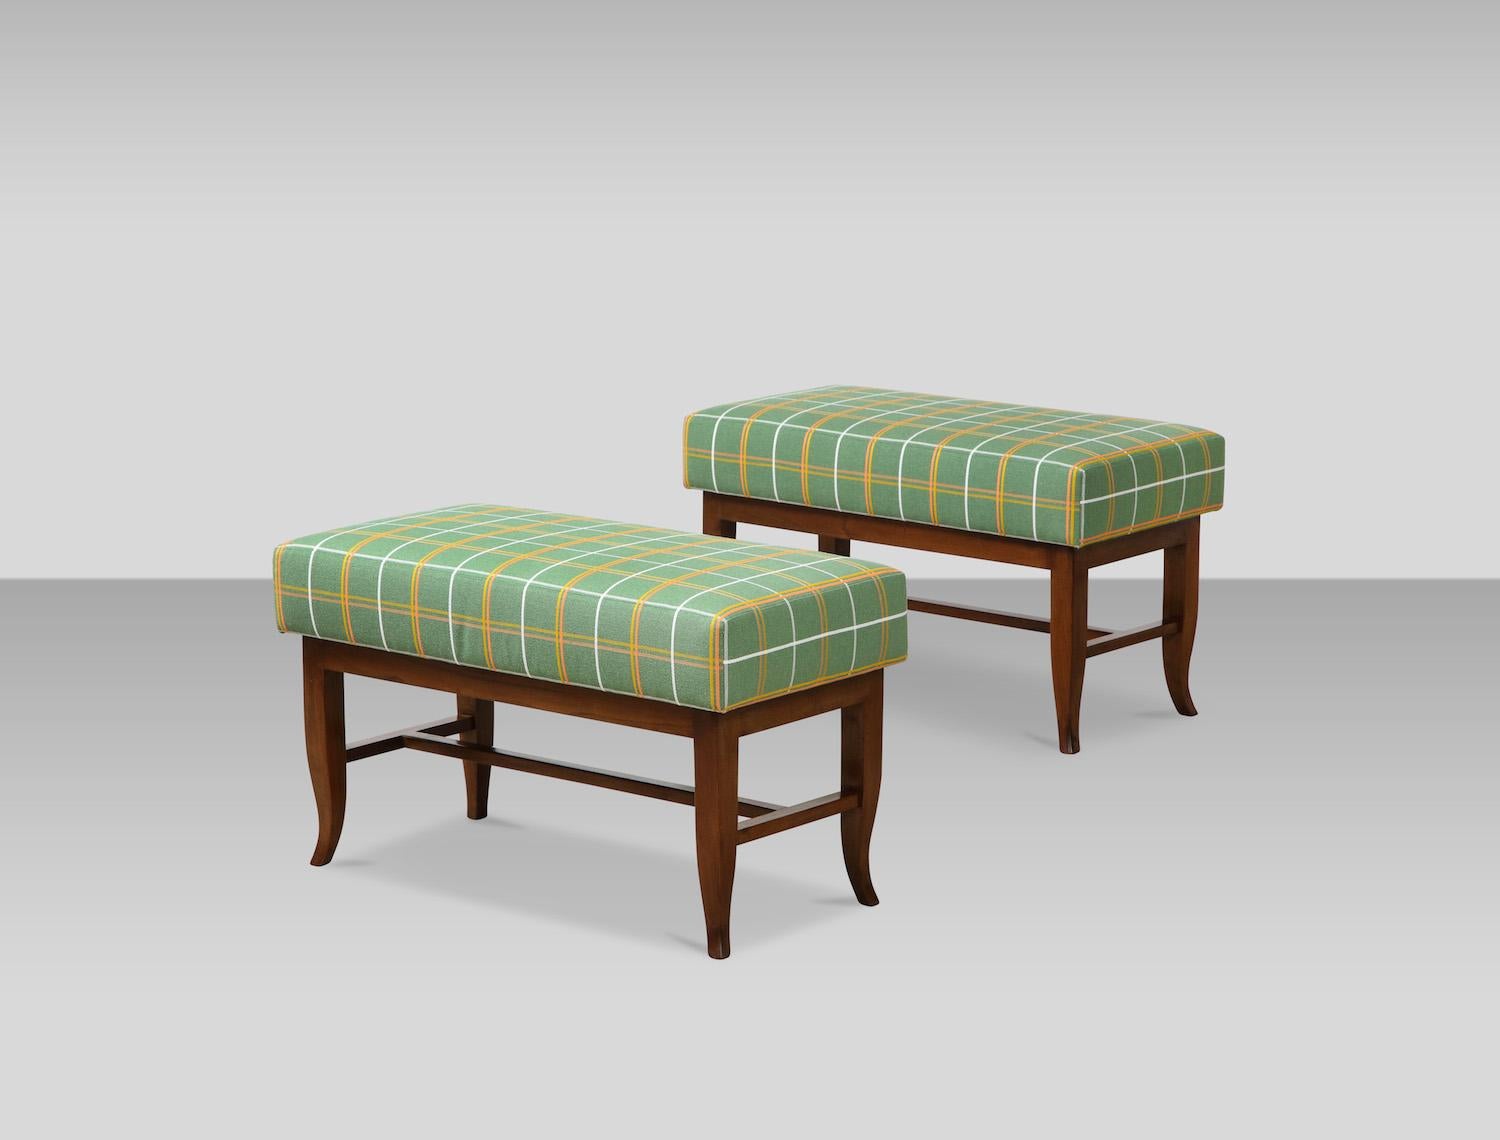 Pair of upholstered benches by Gio Ponti. Rectangular benches with walnut bases and curled lower portion of tapering legs. Very good condition. Wood has been recently cleaned and polish but was most likely refinished at some point. Cushion have